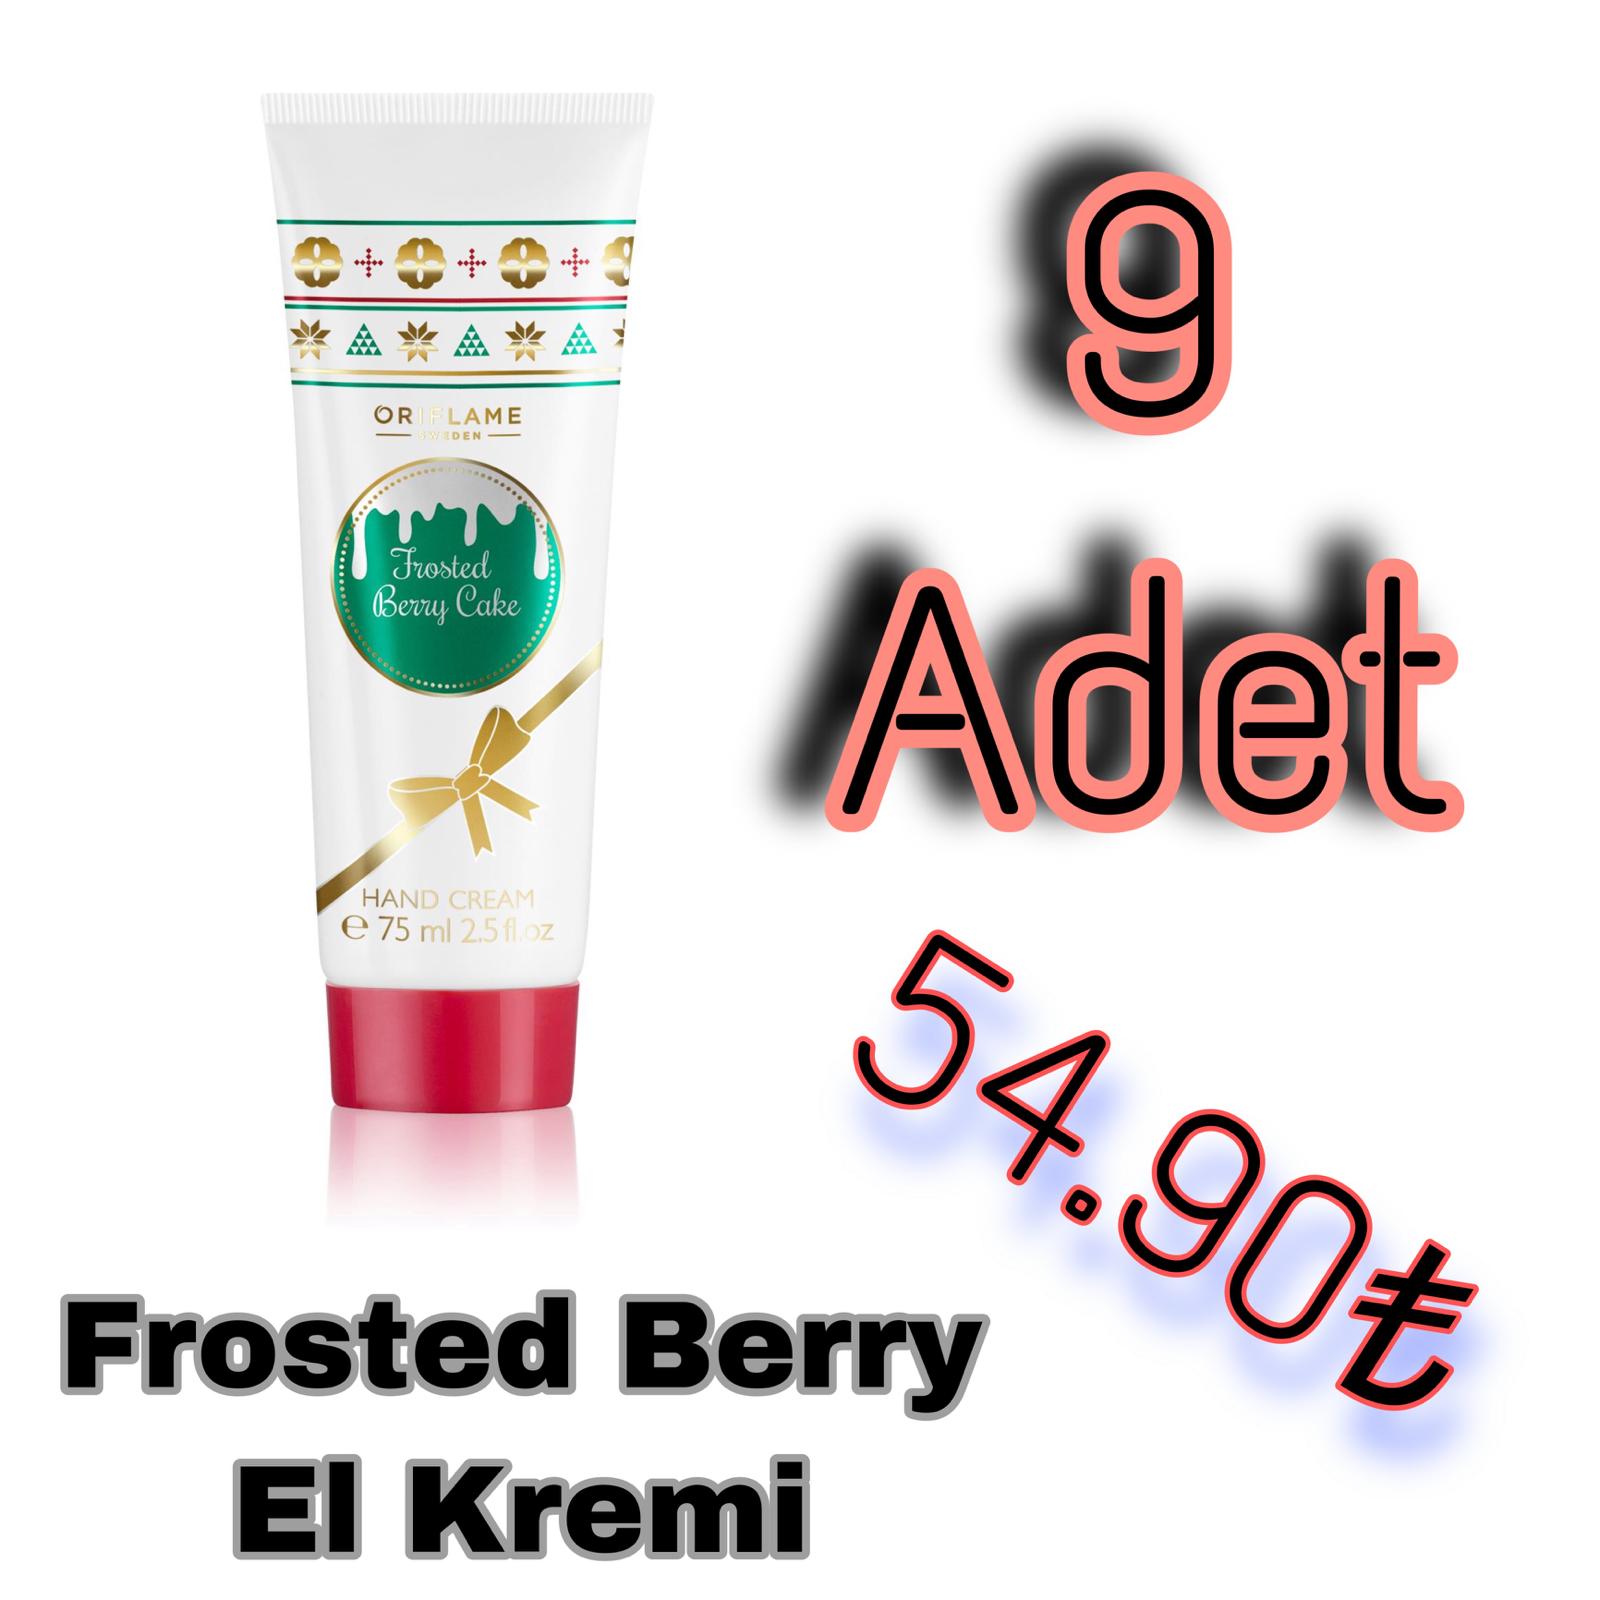 Oriflame Frosted Berry El Kremi 9 ADET